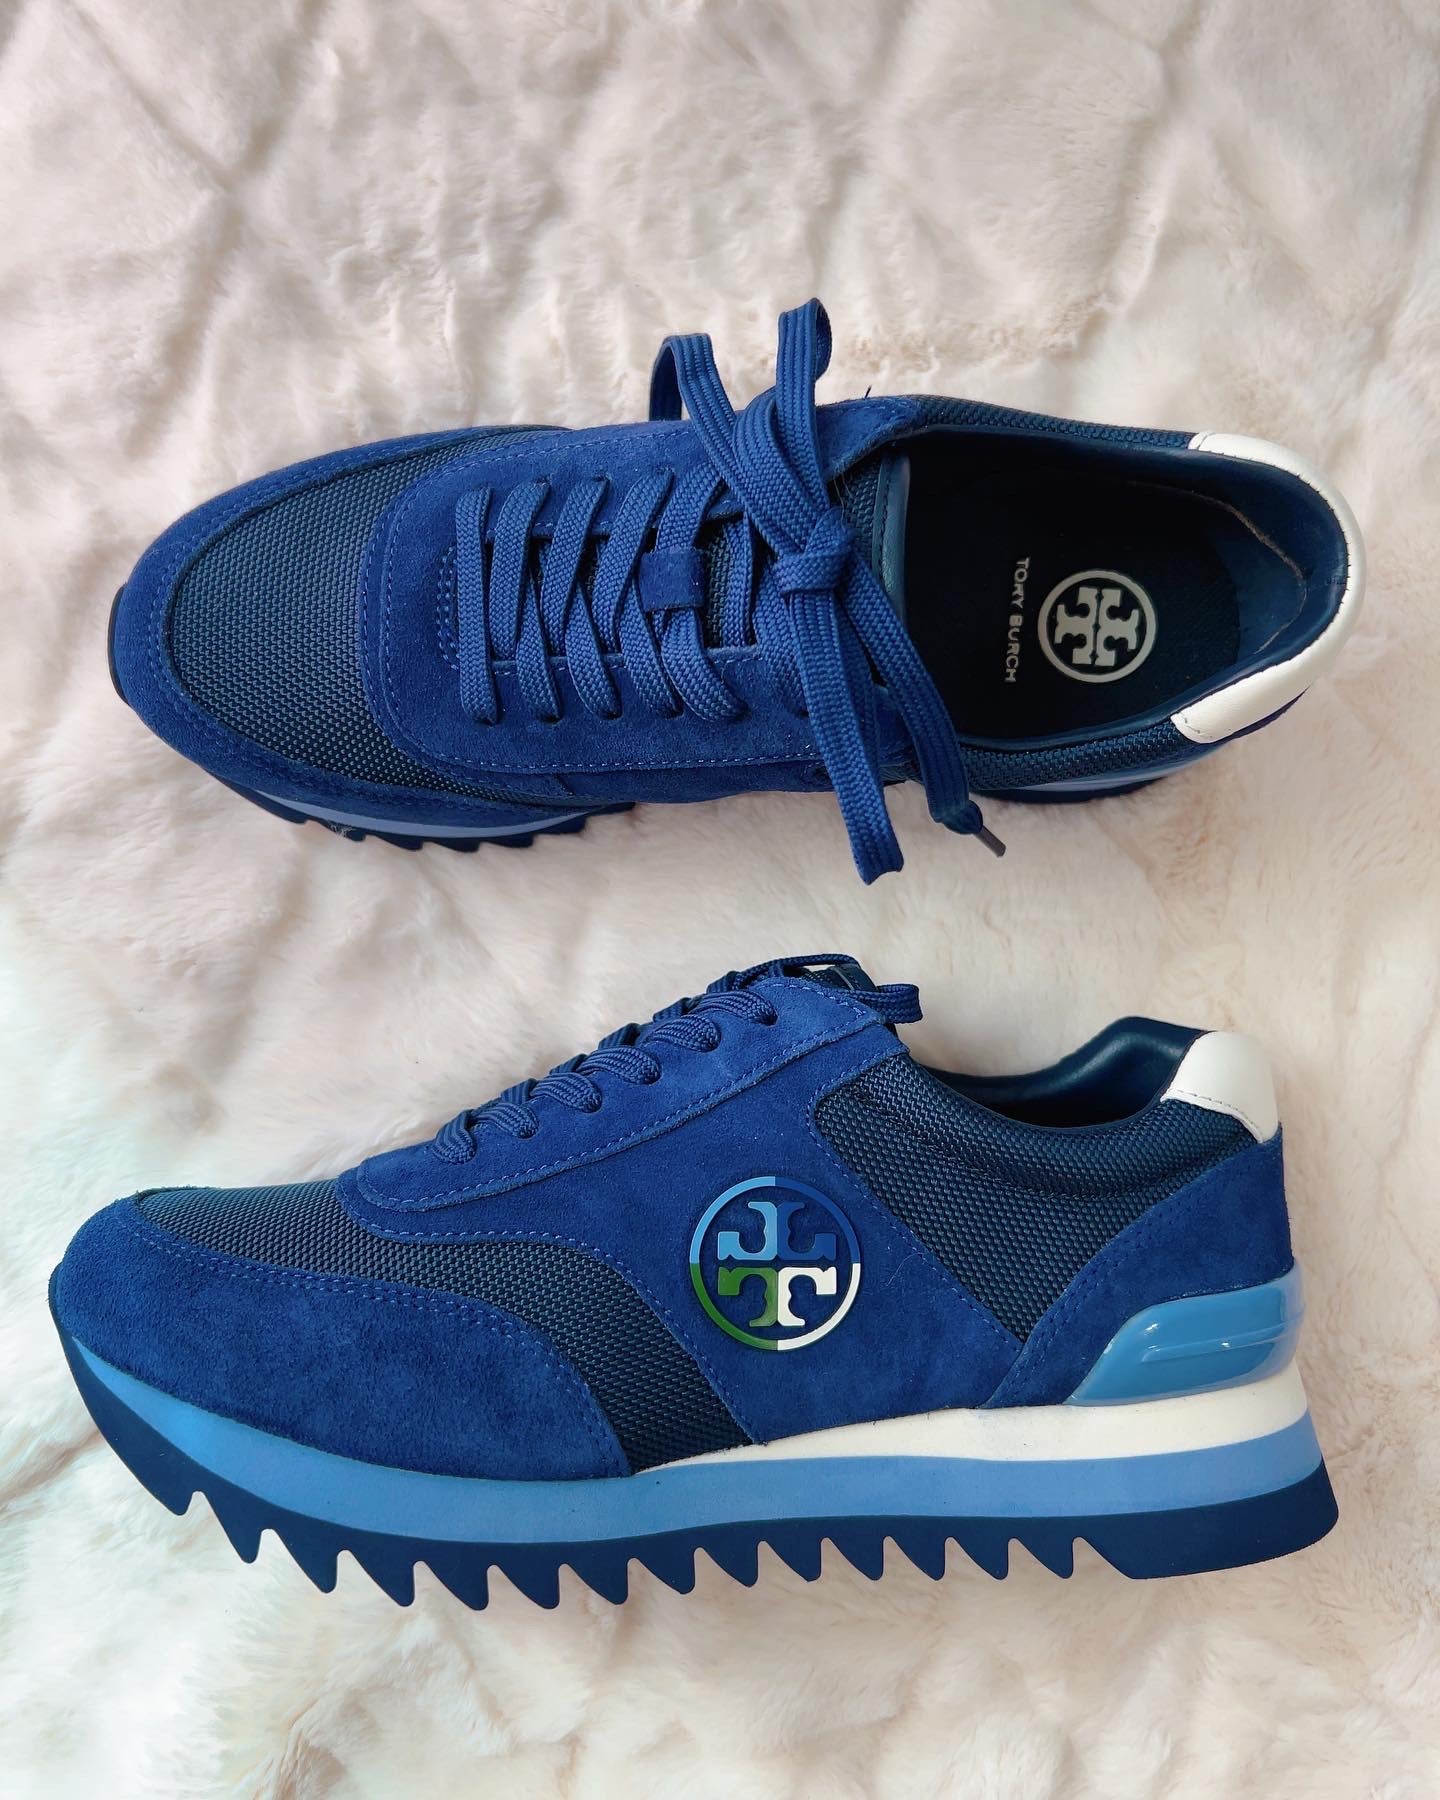 Tory Burch Sawtooth Logo Sneakers, Blue Suede, 6.5 & 7